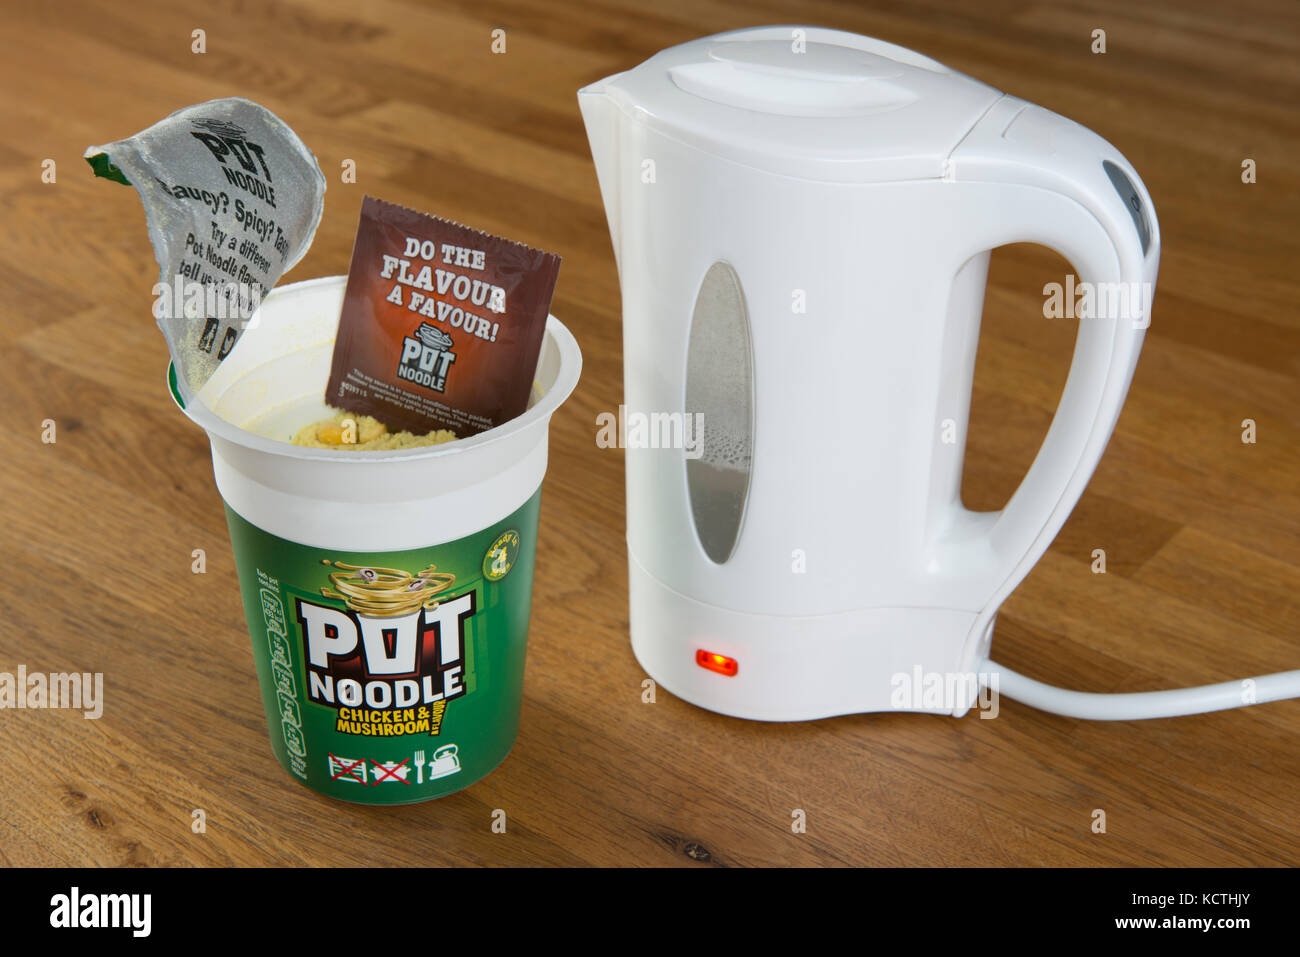 A Unilever Pot Noodle (Chicken and Mushroom flavour) in the process of being prepared using boiling water from a kettle (Editorial use only). Stock Photo